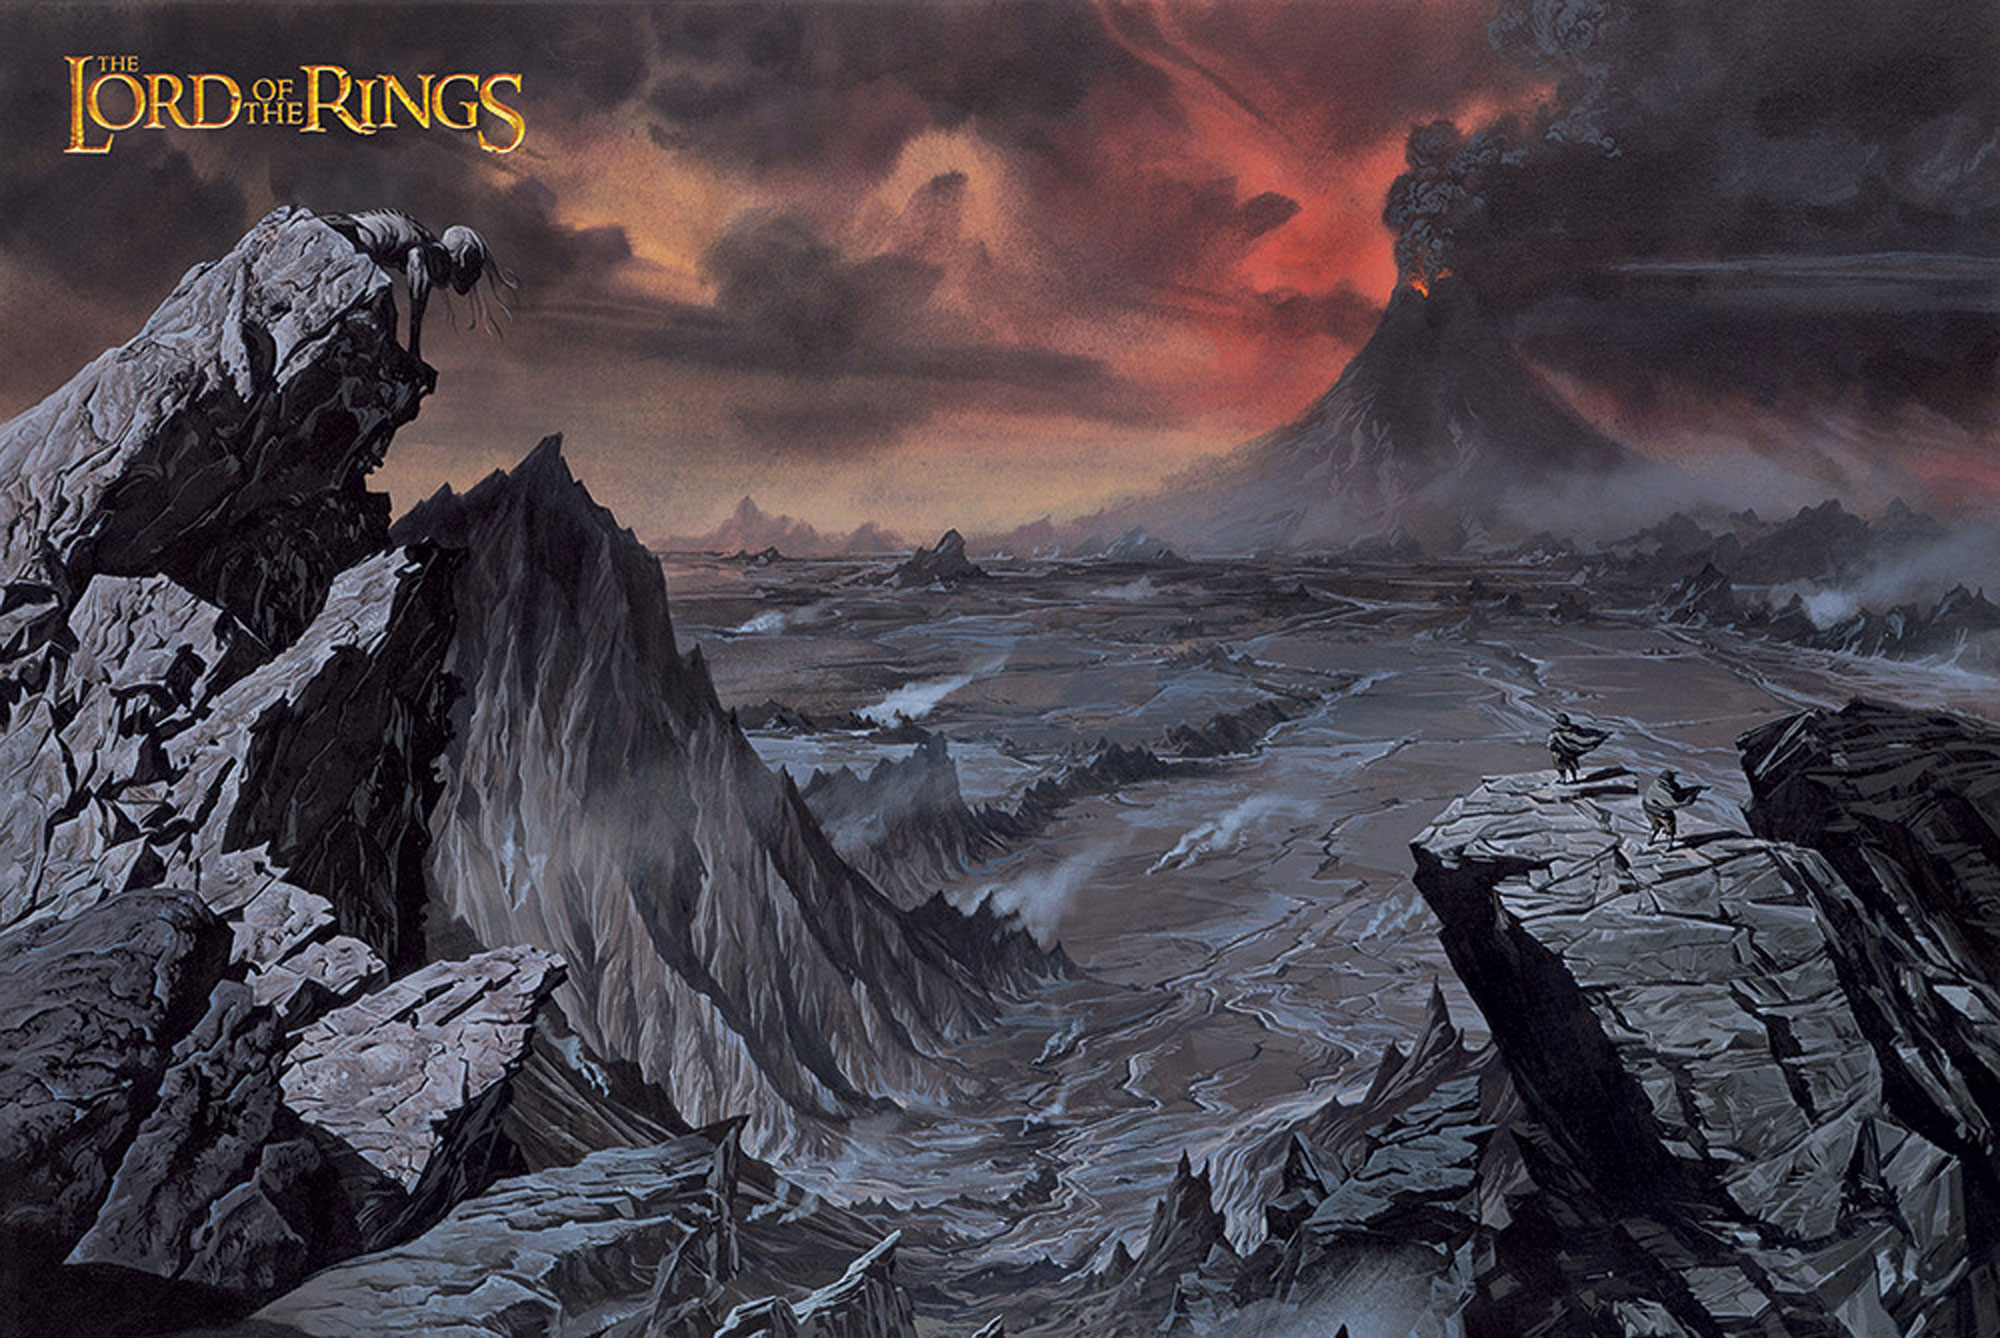 - Mount Doom the Rings, The Lord of